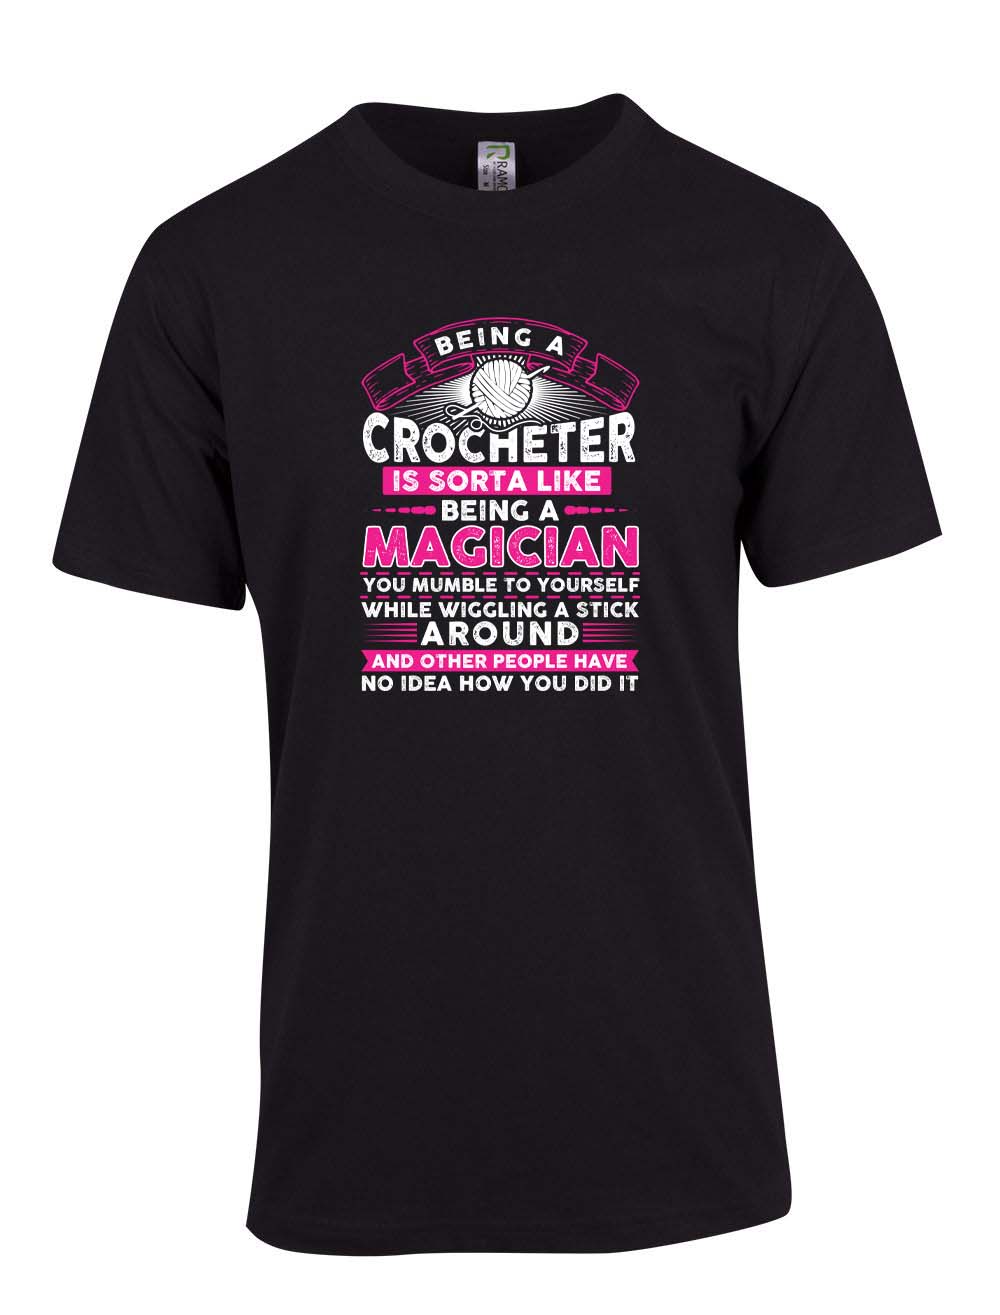 Being a Crocheter is sorter like being a magician T-Shirt